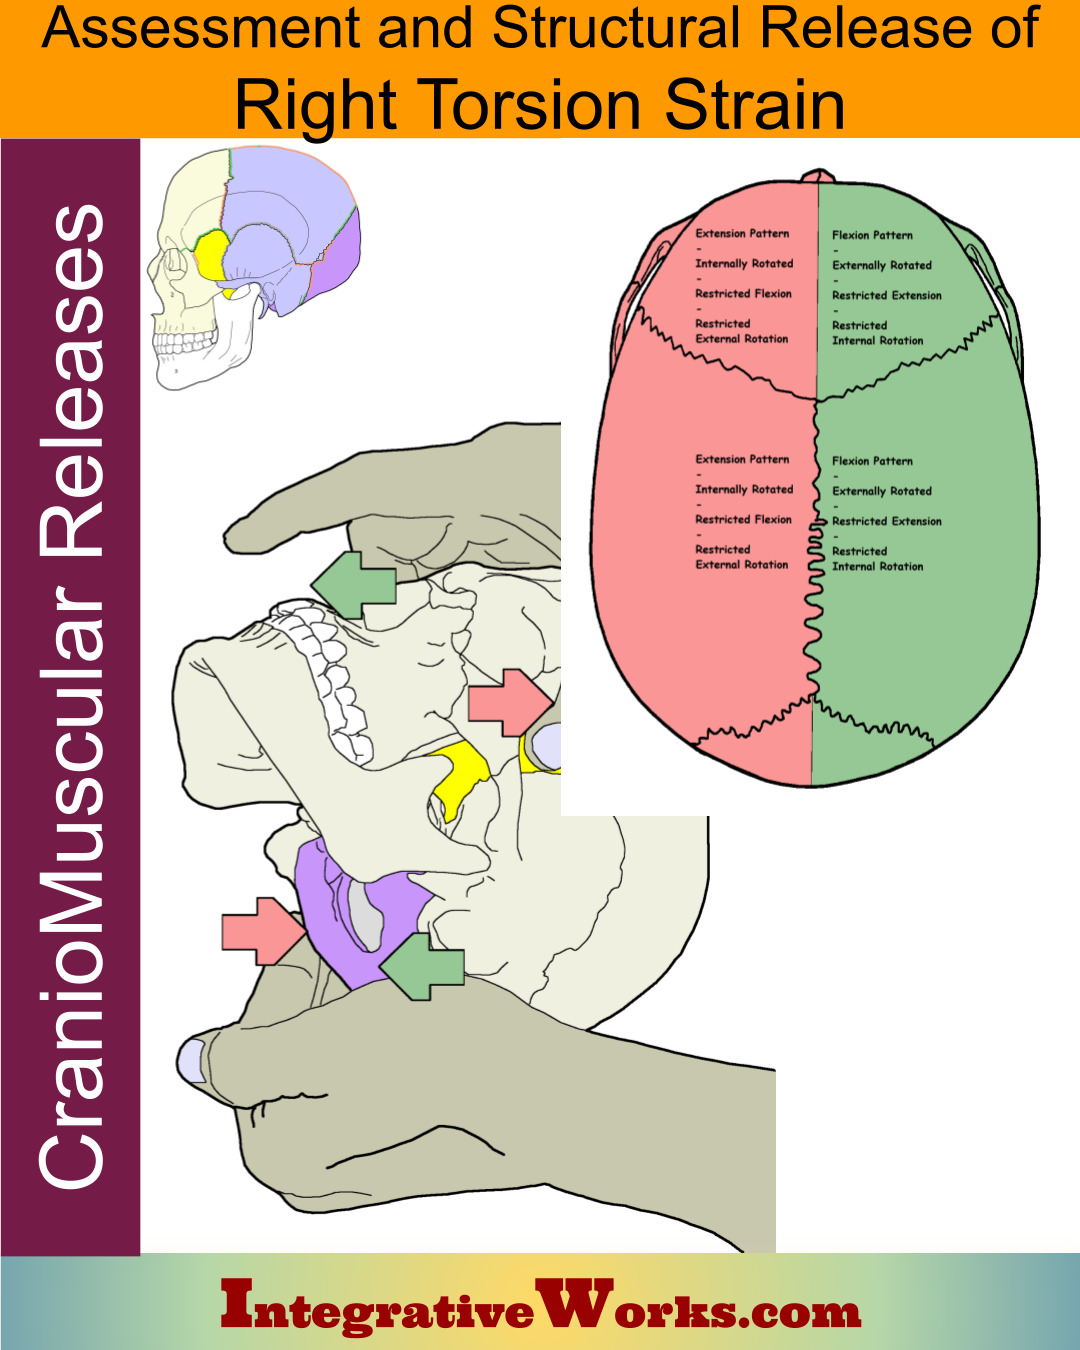 Right Torsion – CranioMuscular Assessment and Release